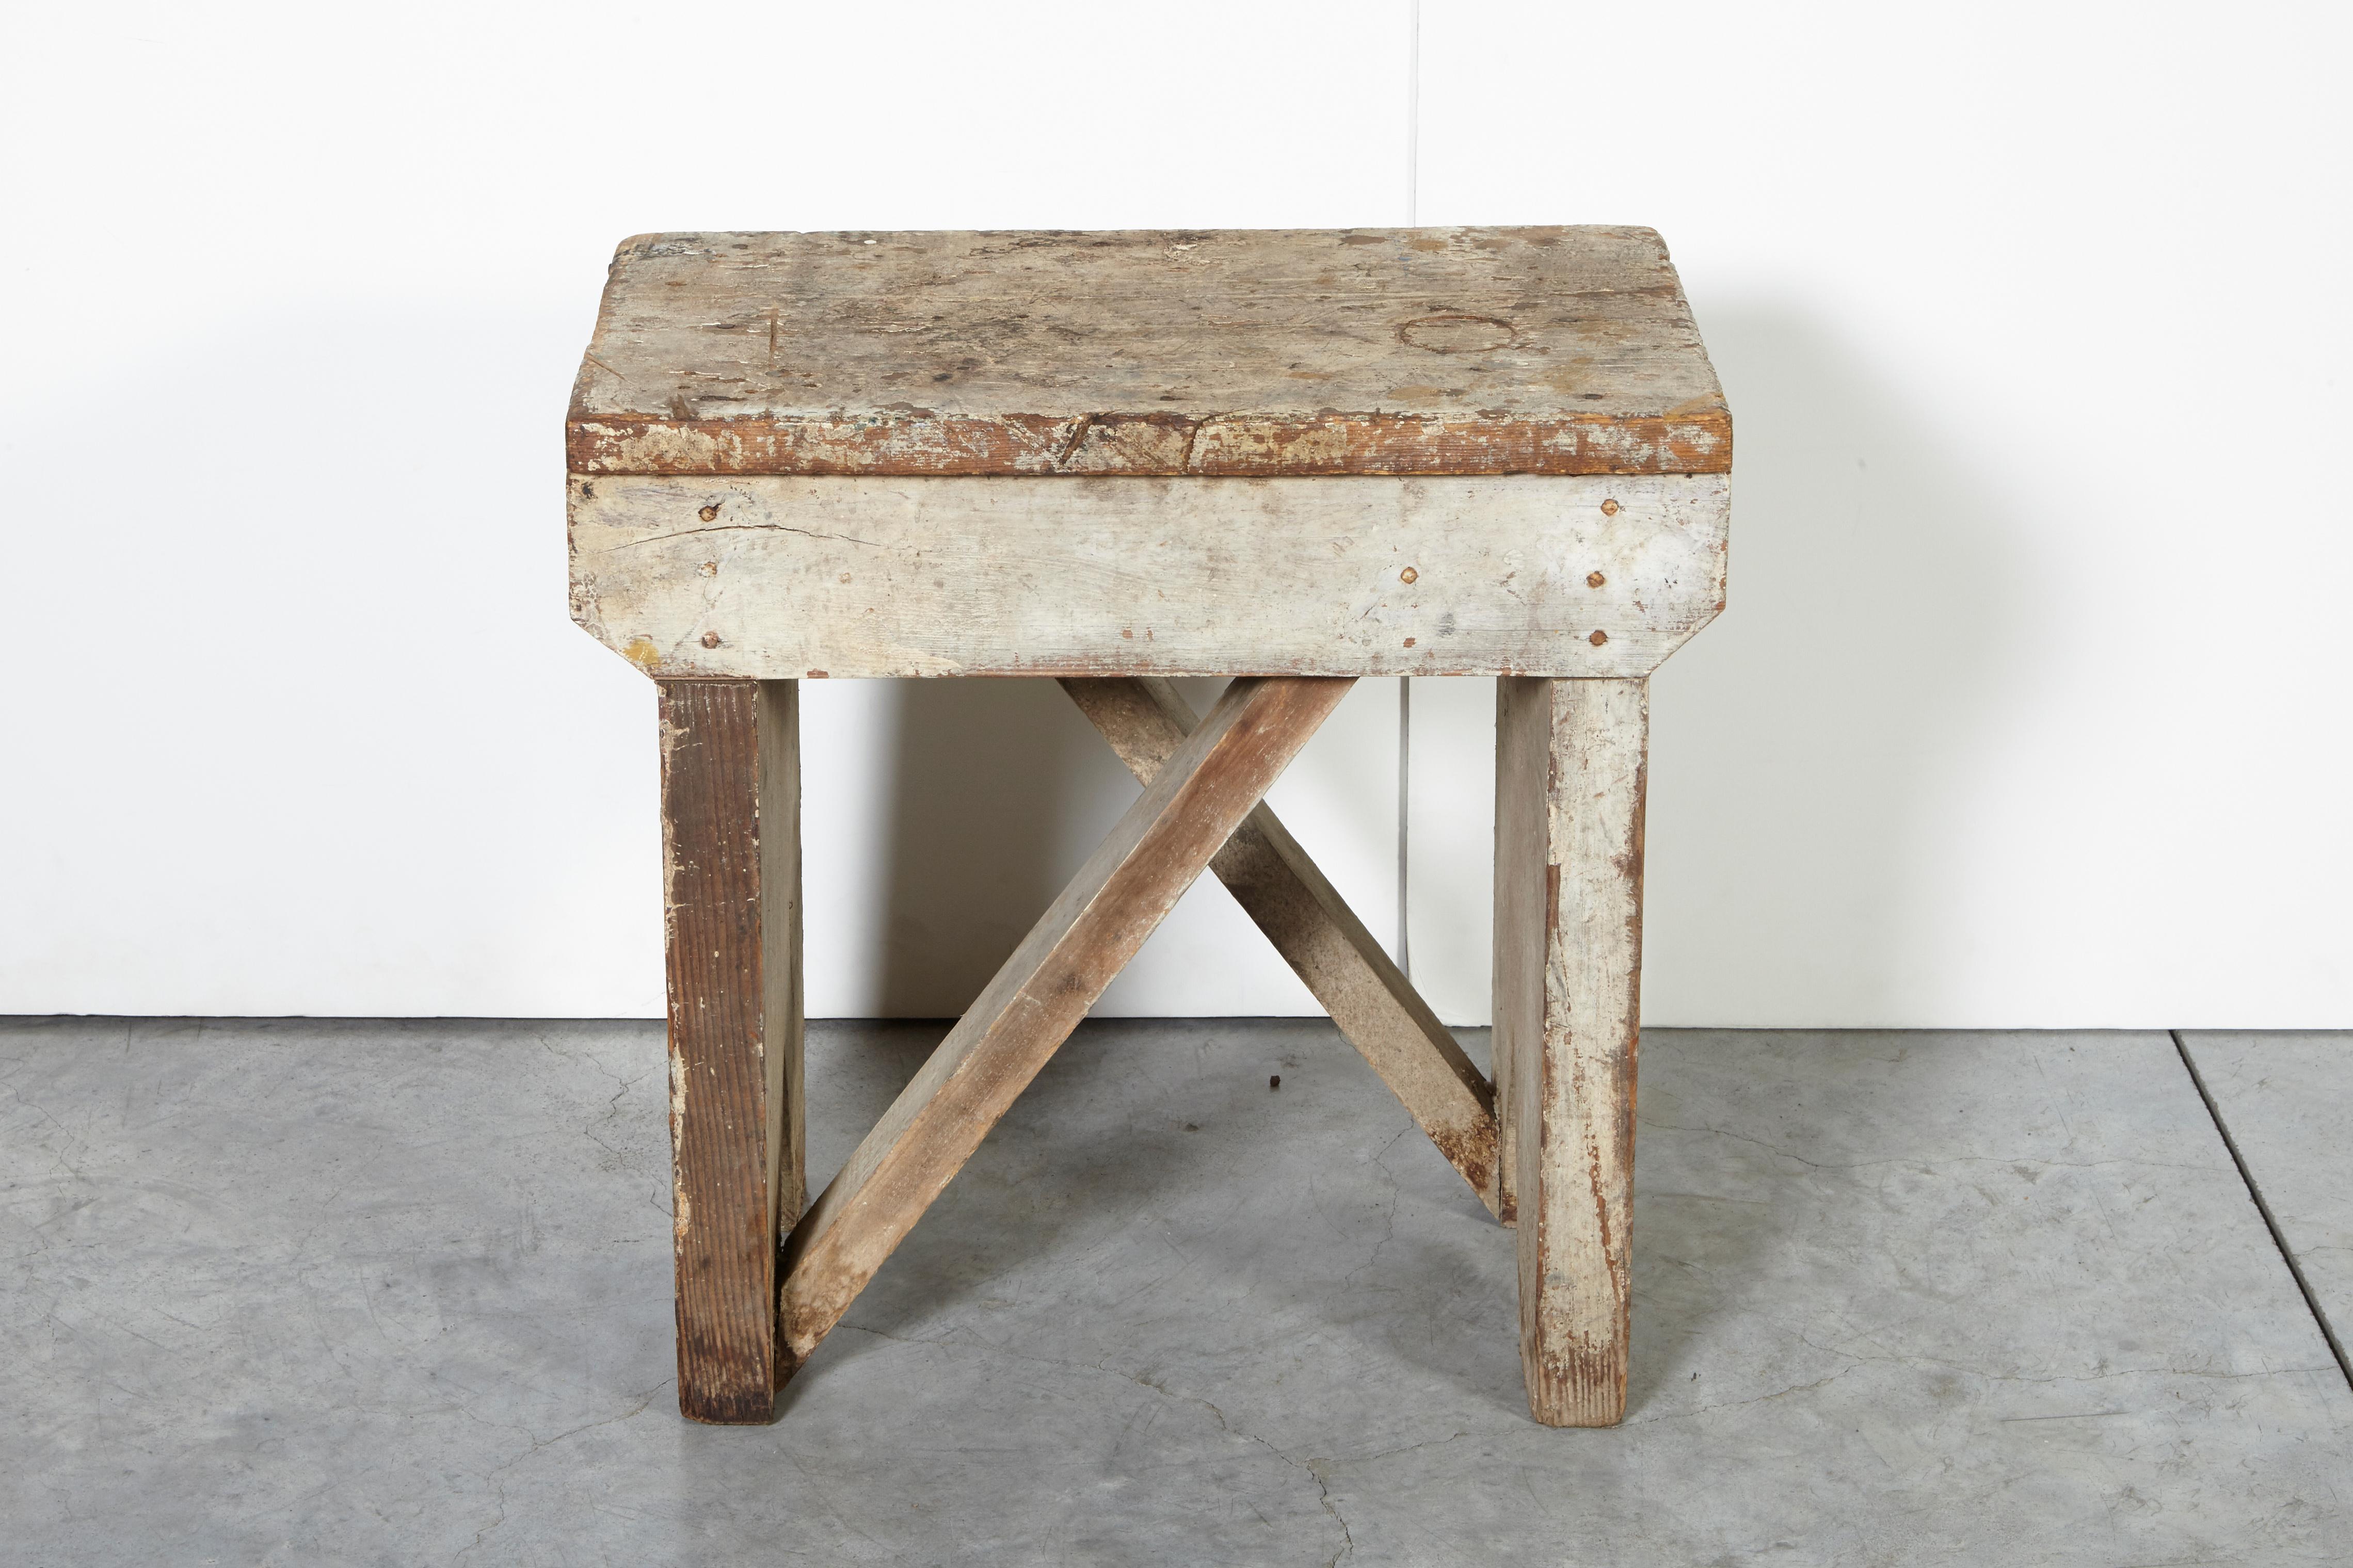 A fantastic well built, heavy and distinctively designed American stool/side table with great patina and original paint.
Measures: L 16, D 10, H 16.